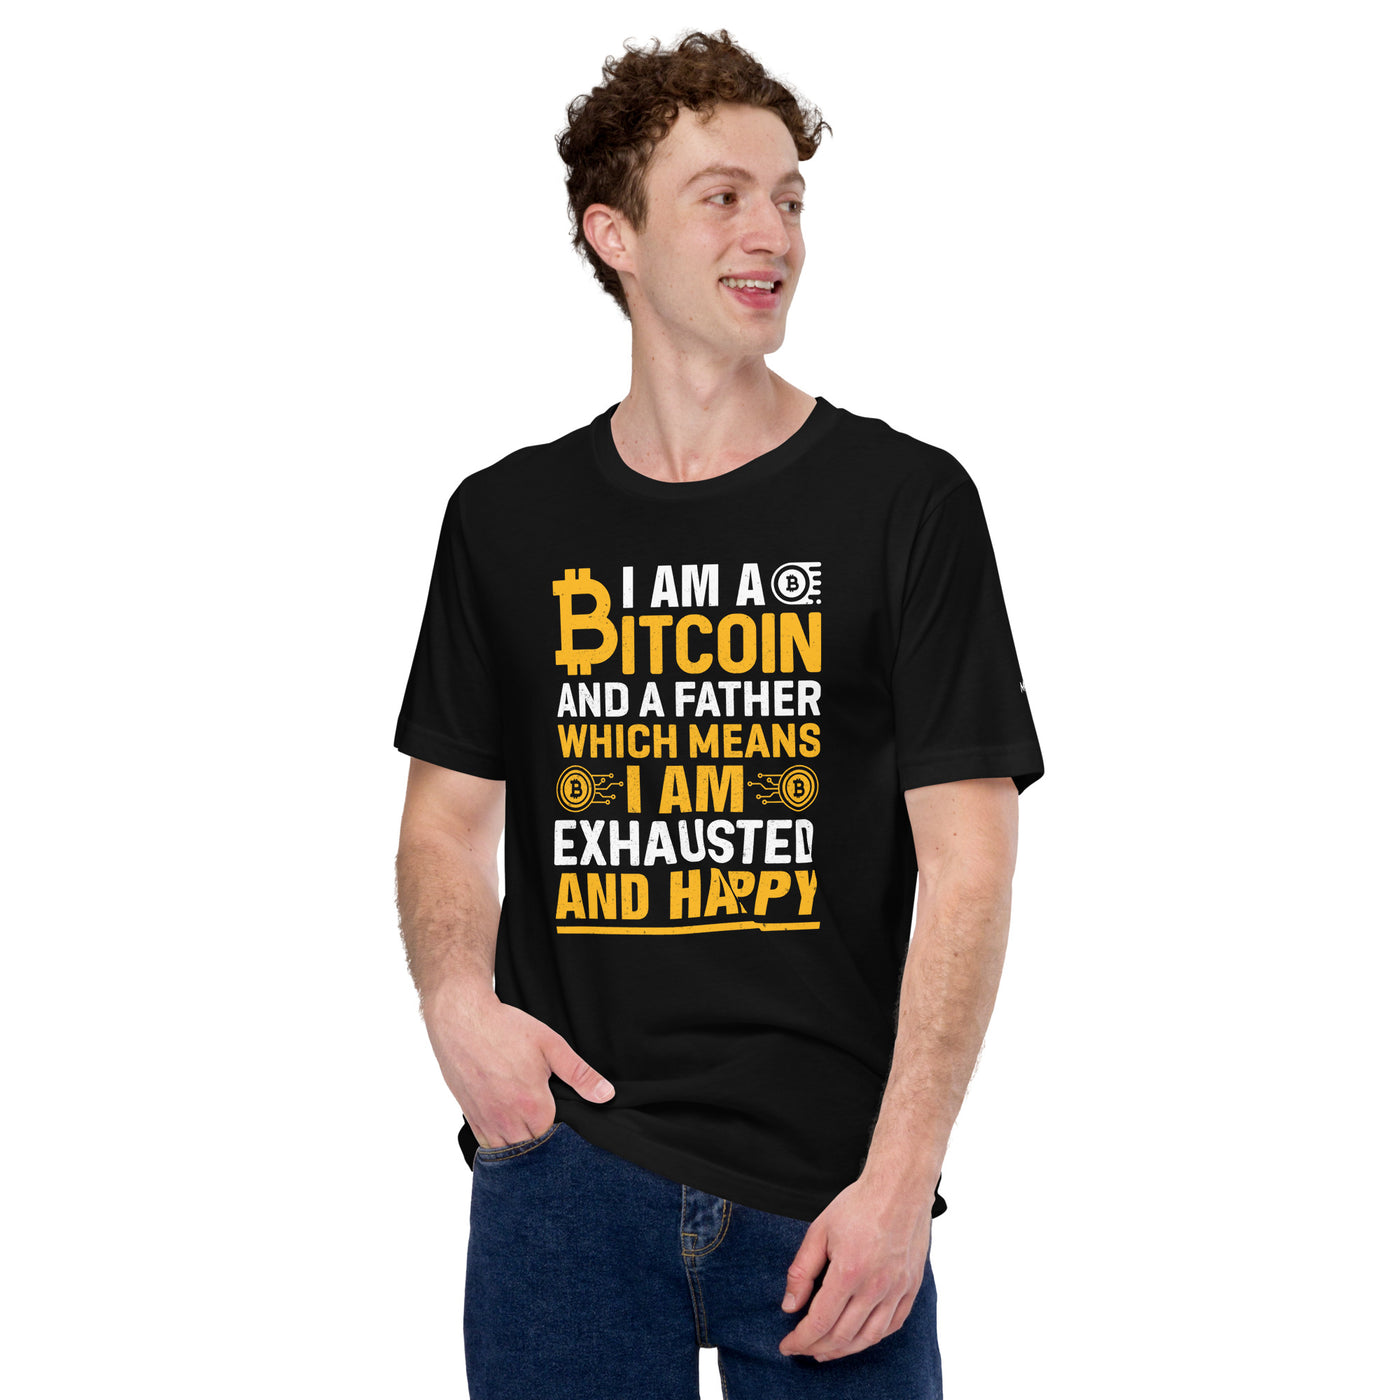 I am a Bitcoin and a Father - Unisex t-shirt